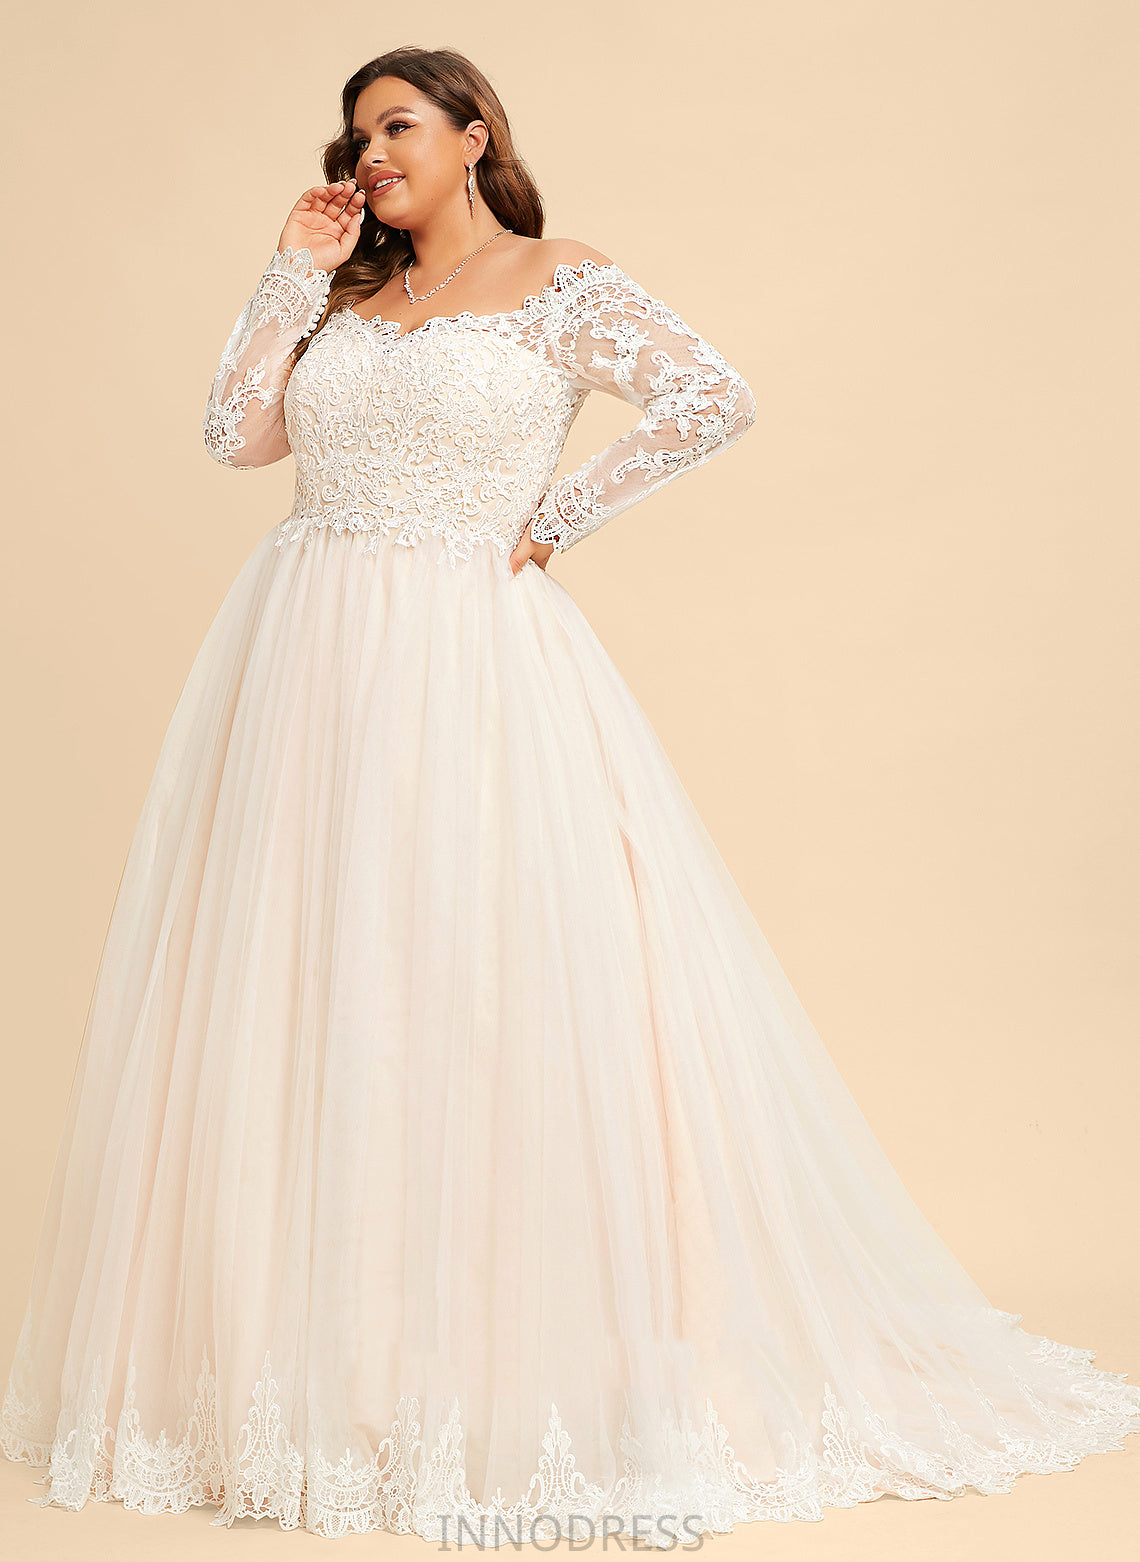 Tulle Lace Lana Wedding Dresses Off-the-Shoulder Train Ball-Gown/Princess Wedding Dress Chapel